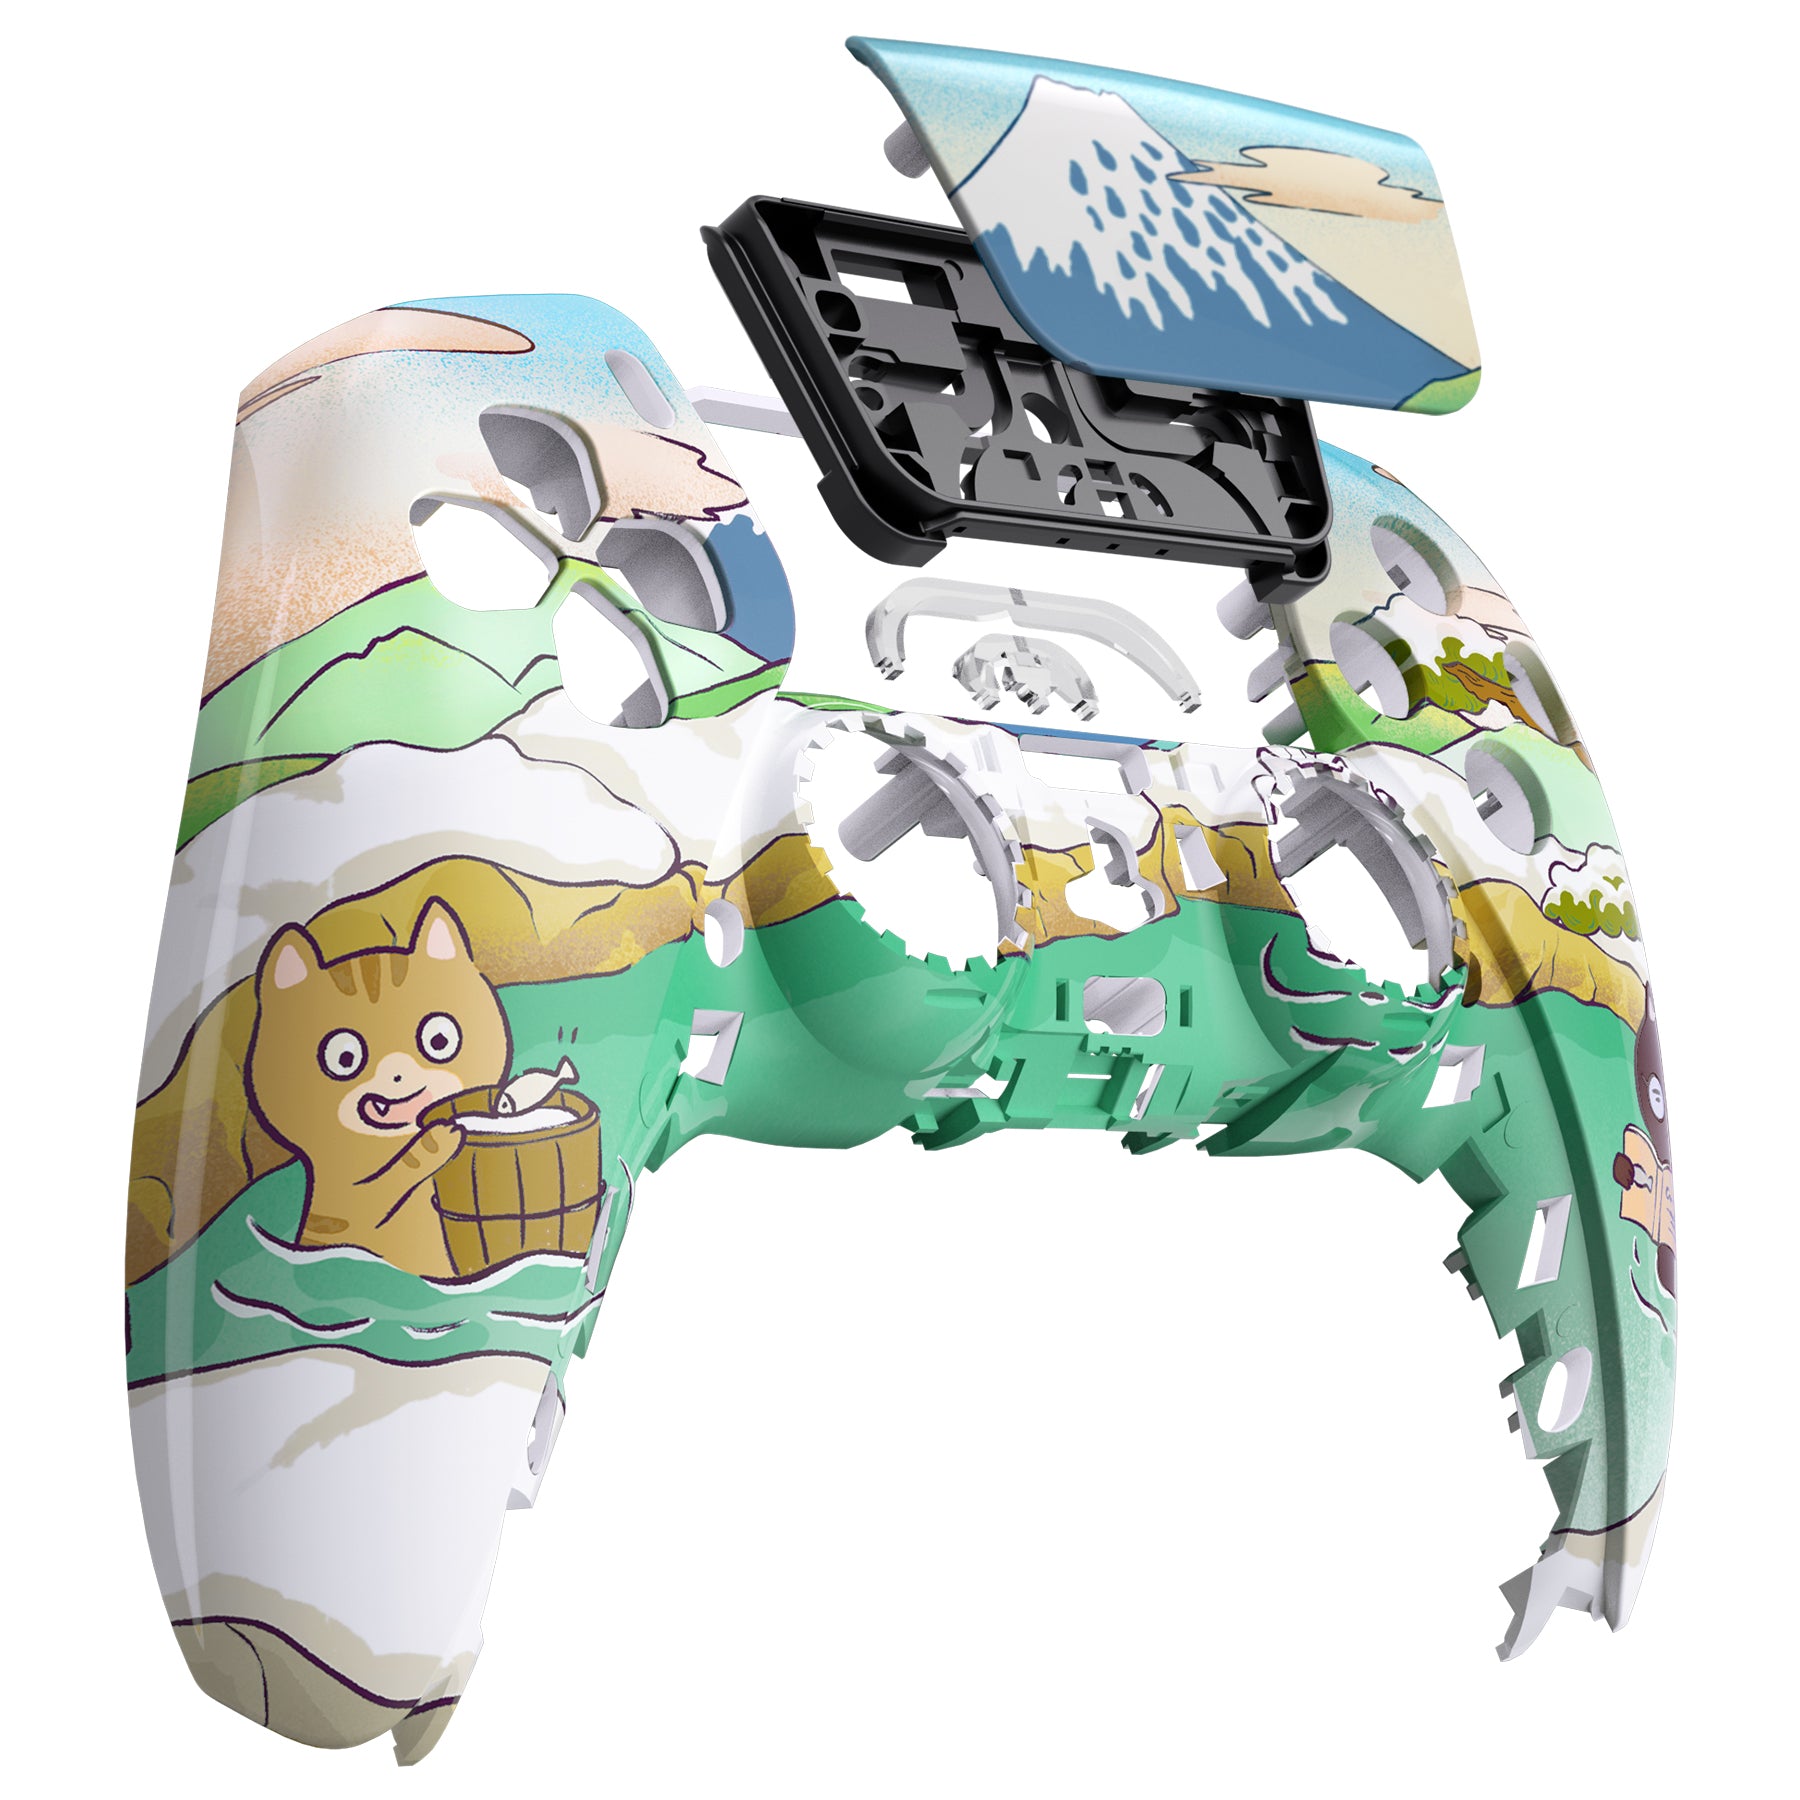 eXtremeRate Retail Hot Spring Kitties Front Housing Shell Compatible with ps5 Controller BDM-010 BDM-020 BDM-030, DIY Replacement Shell Custom Touch Pad Cover Compatible with ps5 Controller - ZPFR007G3